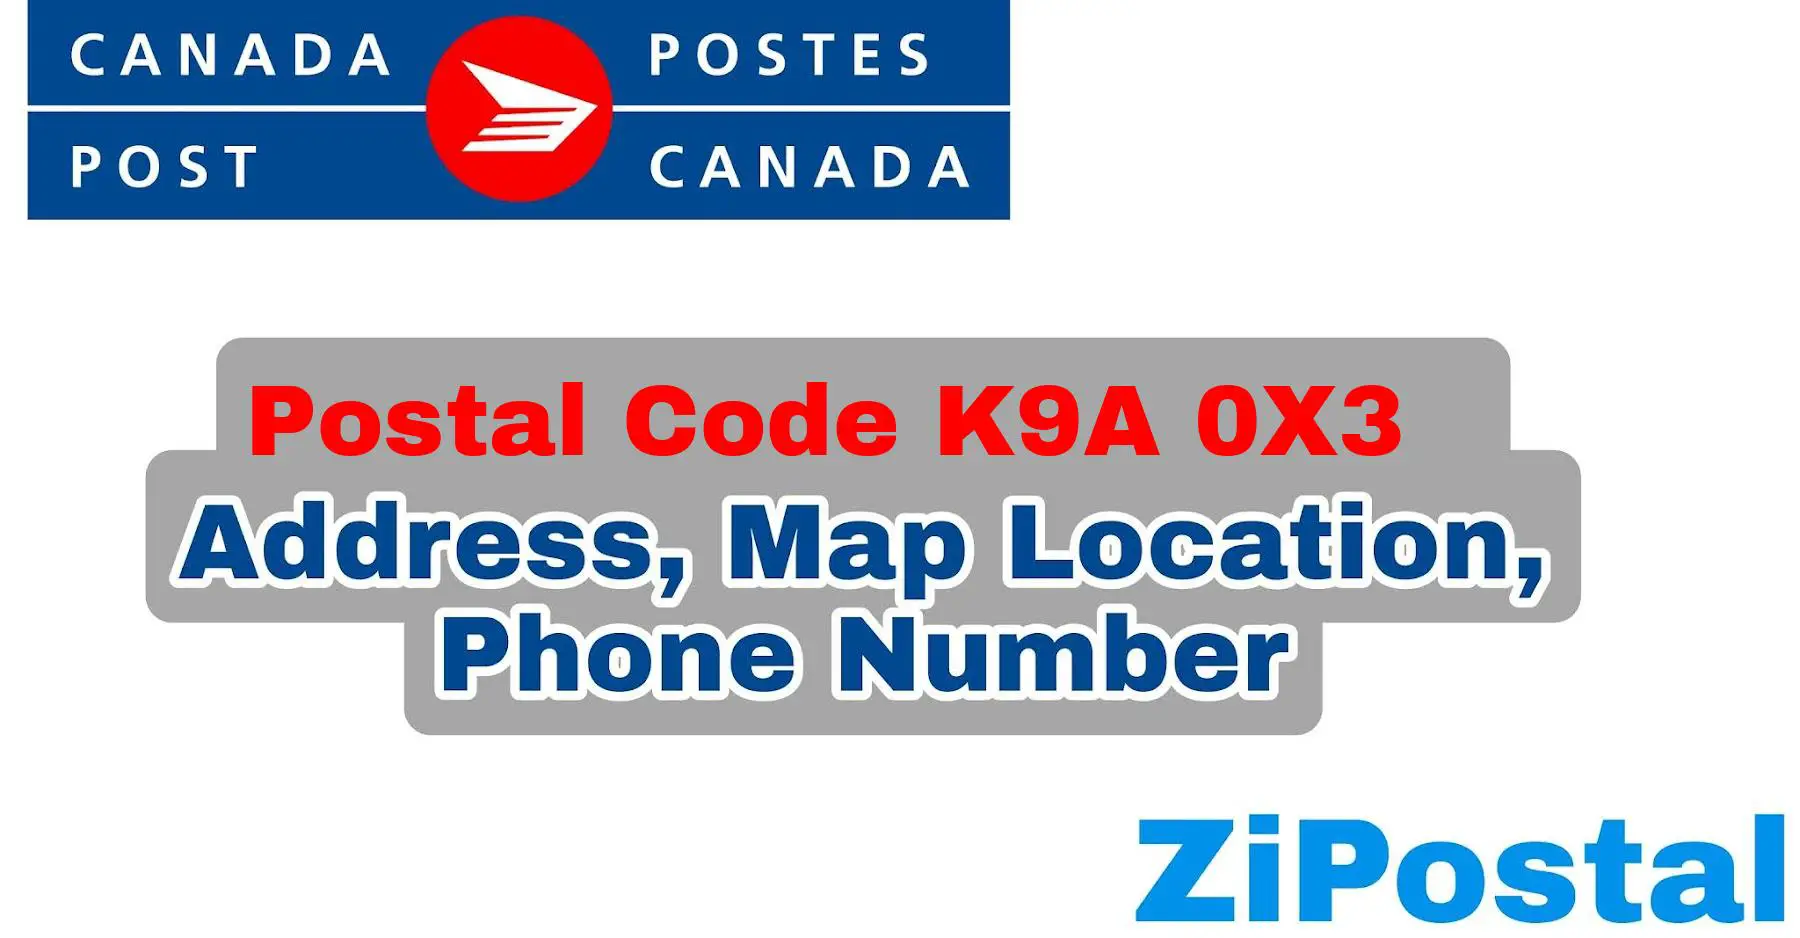 Postal Code K9A 0X3 Address Map Location and Phone Number